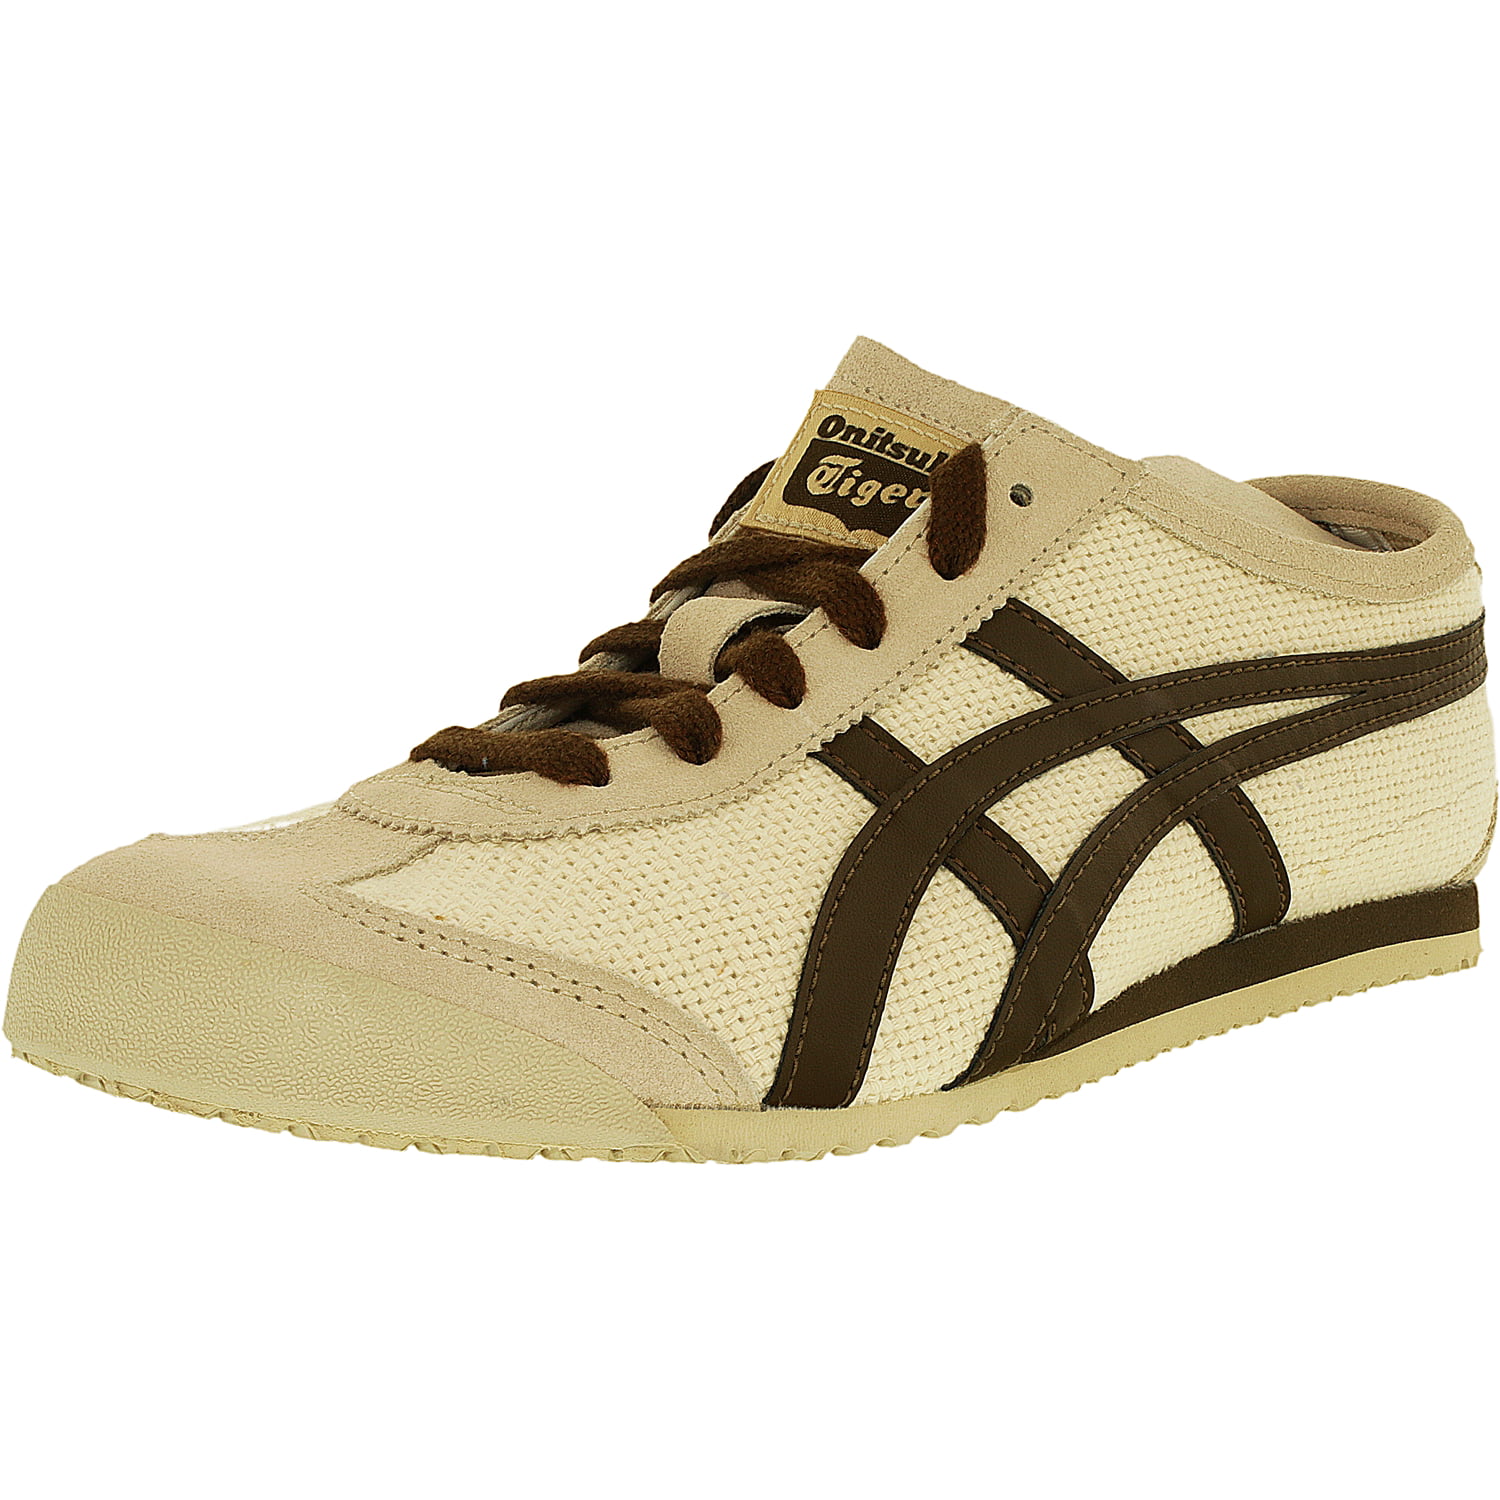 Onitsuka Tiger - Onitsuka Tiger Women's Mexico 66 Ankle-High Fabric